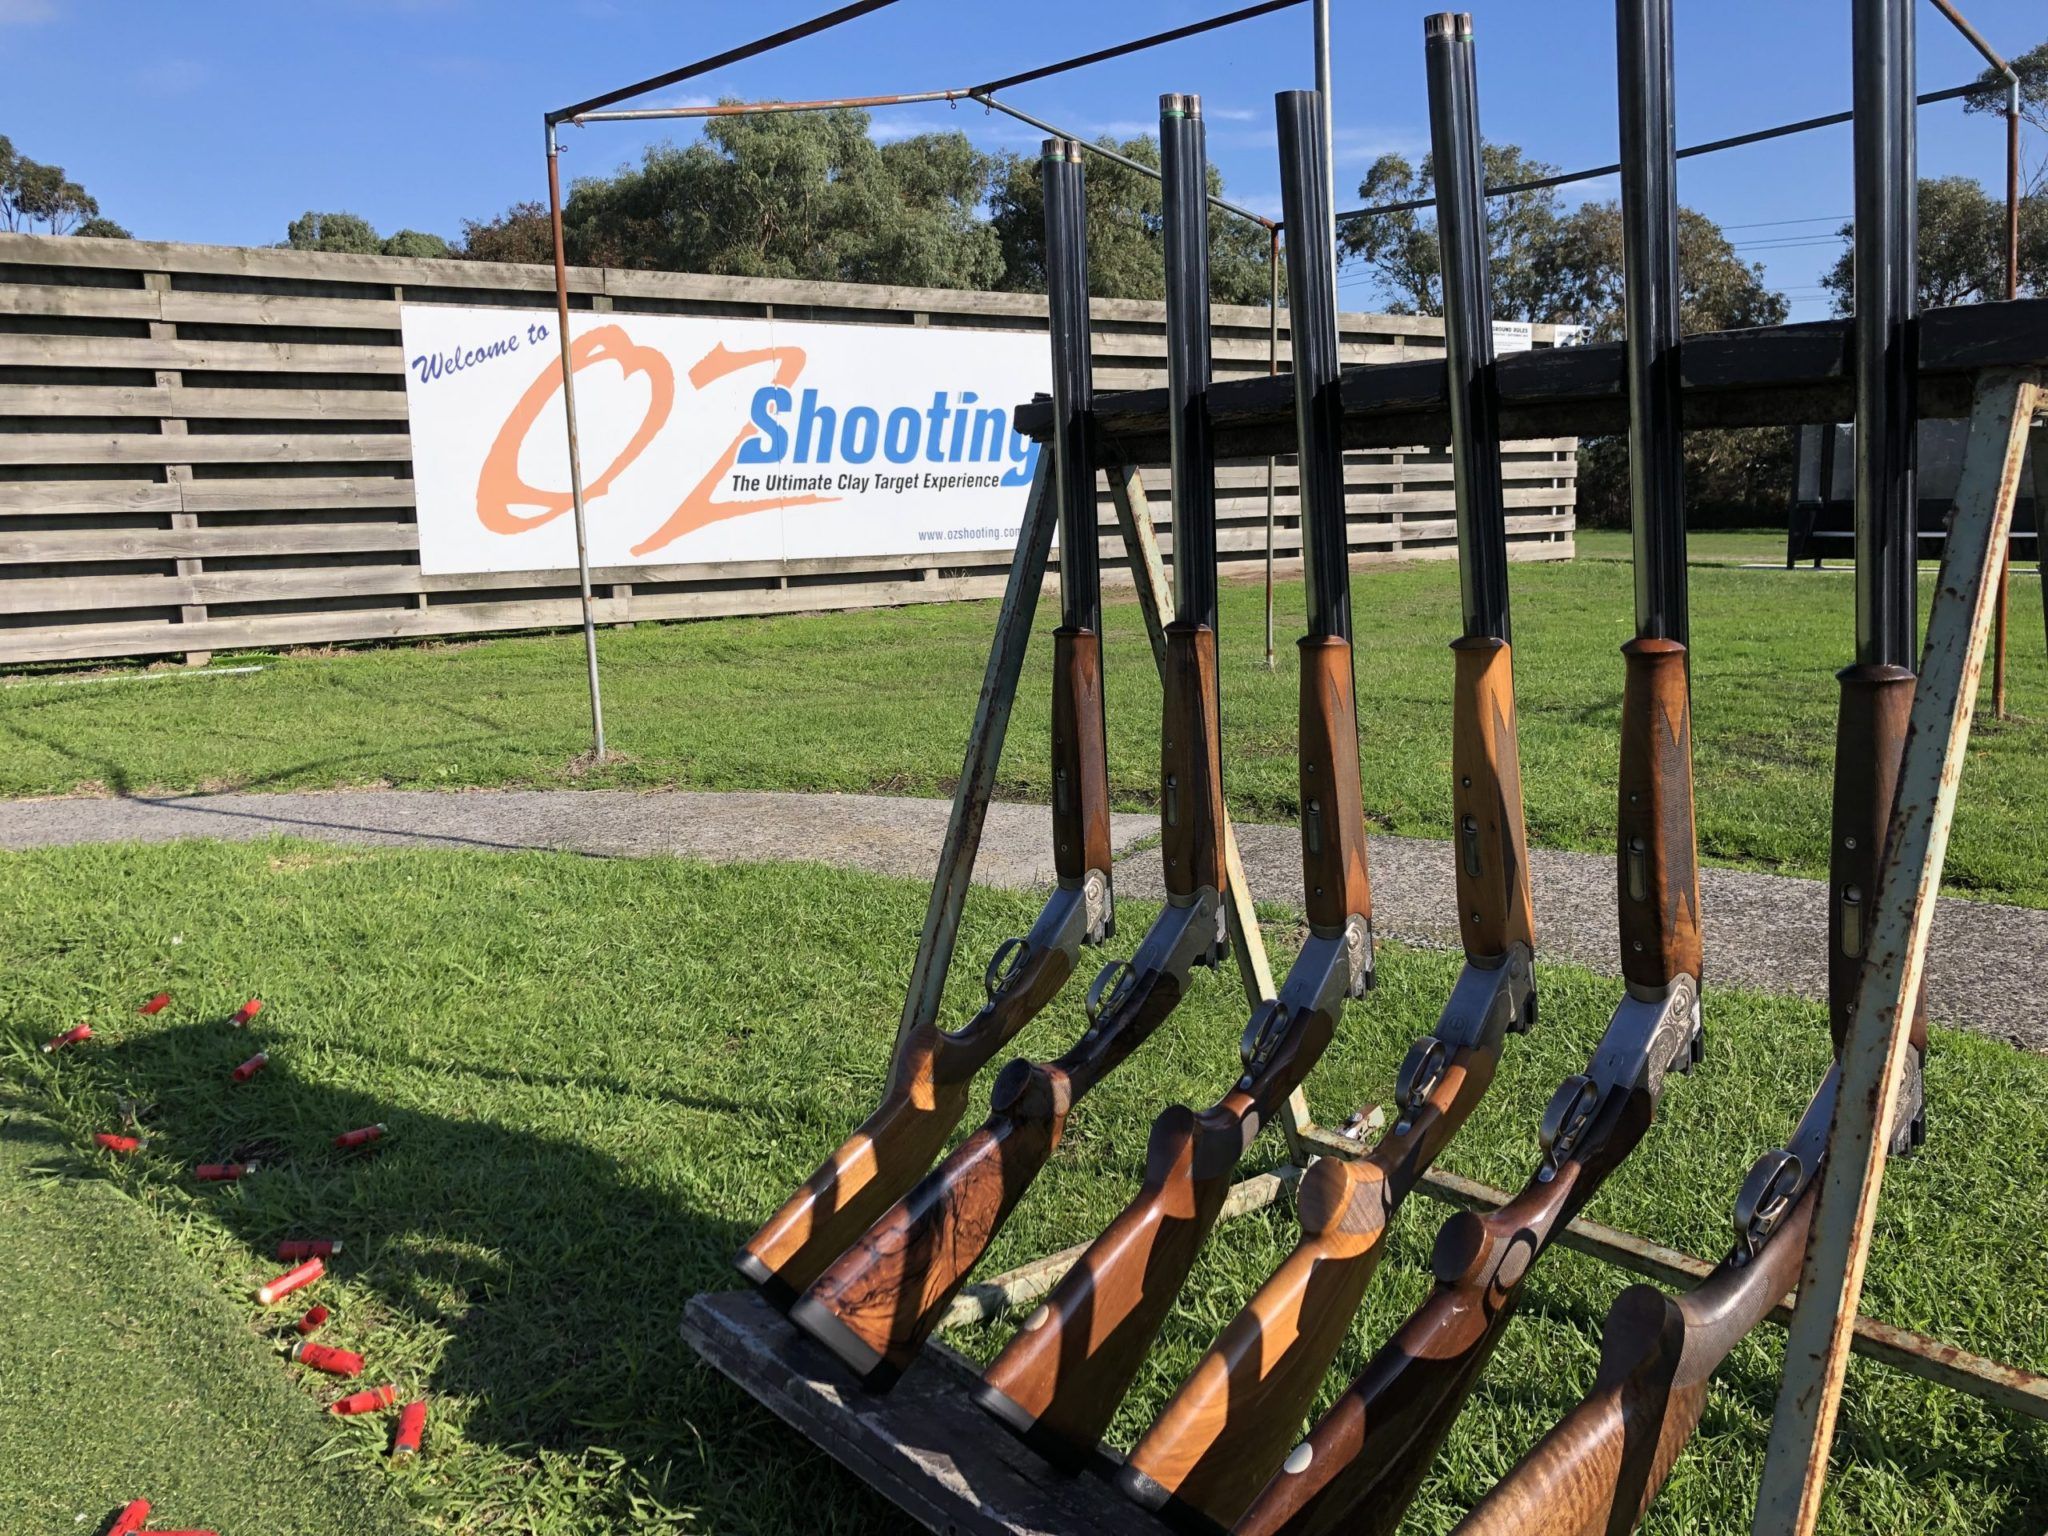 Six rifles on a stand with a sign in the background with blue and orange text “Welcome to Oz Shooting the ultimate clay target experience”